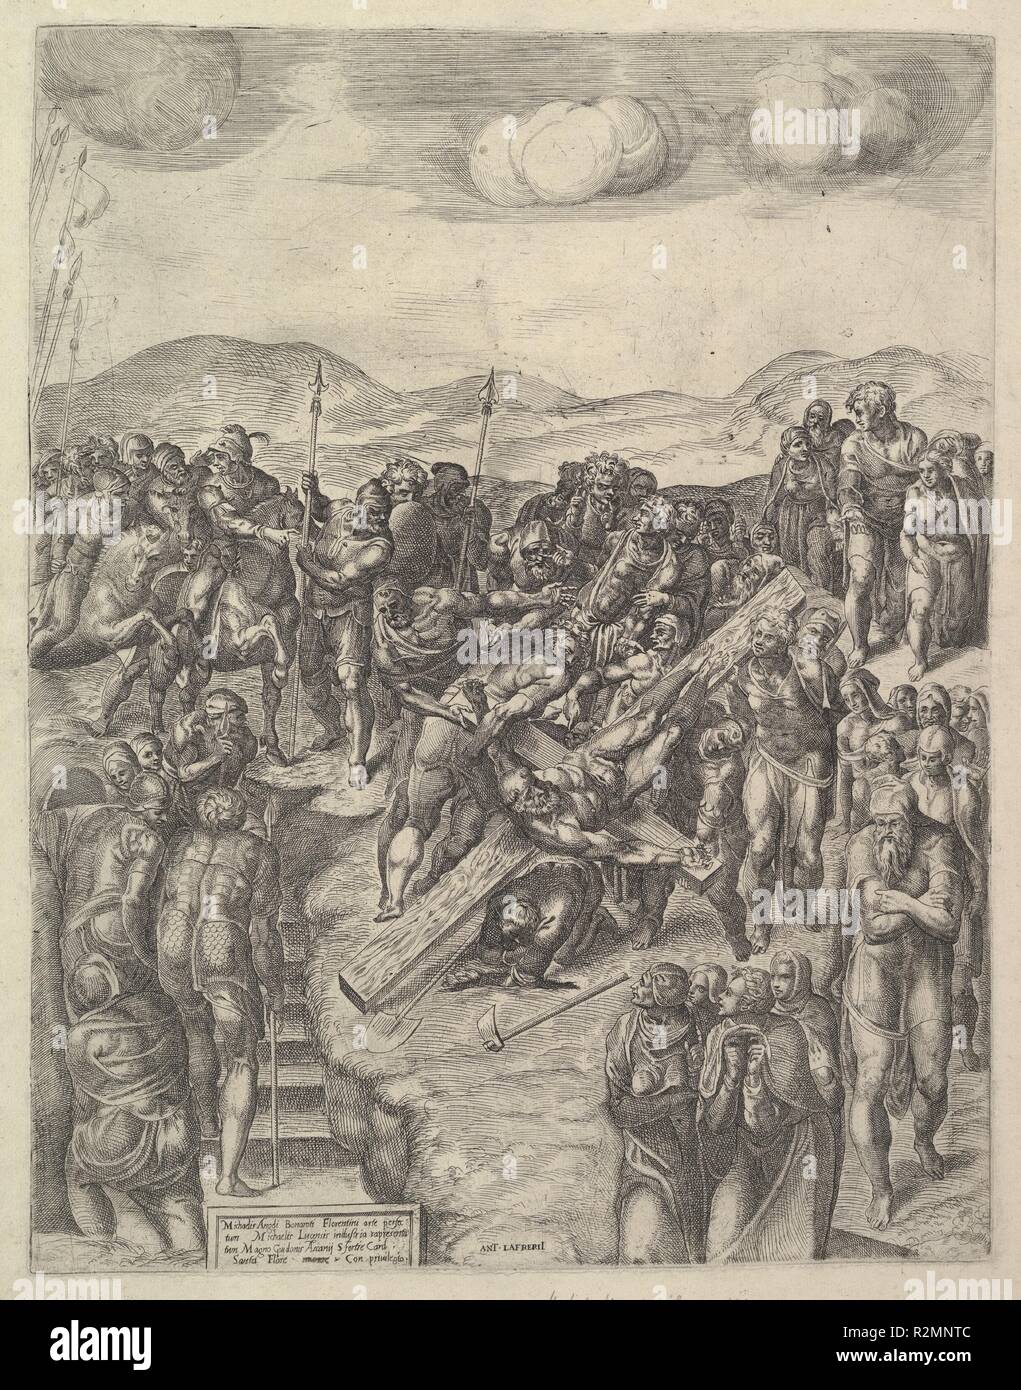 The Crucifixion of St Peter (after Michelangelo's Frescoes in the Pauline Chapel, Vatican Palace). Artist: After Michelangelo Buonarroti (Italian, Caprese 1475-1564 Rome); Michele Lucchese (Italian, active Rome, 1534-64). Dimensions: plate: 16 7/16 x 12 3/4 in. (41.8 x 32.4 cm)  sheet: 18 7/16 x 14 1/4 in. (46.8 x 36.2 cm). Publisher: Antonio Lafreri (French, Orgelet, Franche-Comte ca. 1512-1577 Rome). Date: 1550-60.  See: B. Barnes, 'Michelangelo in Print: Reproductions as Response in the Sixteenth Century', 2010, no.66. Museum: Metropolitan Museum of Art, New York, USA. Stock Photo